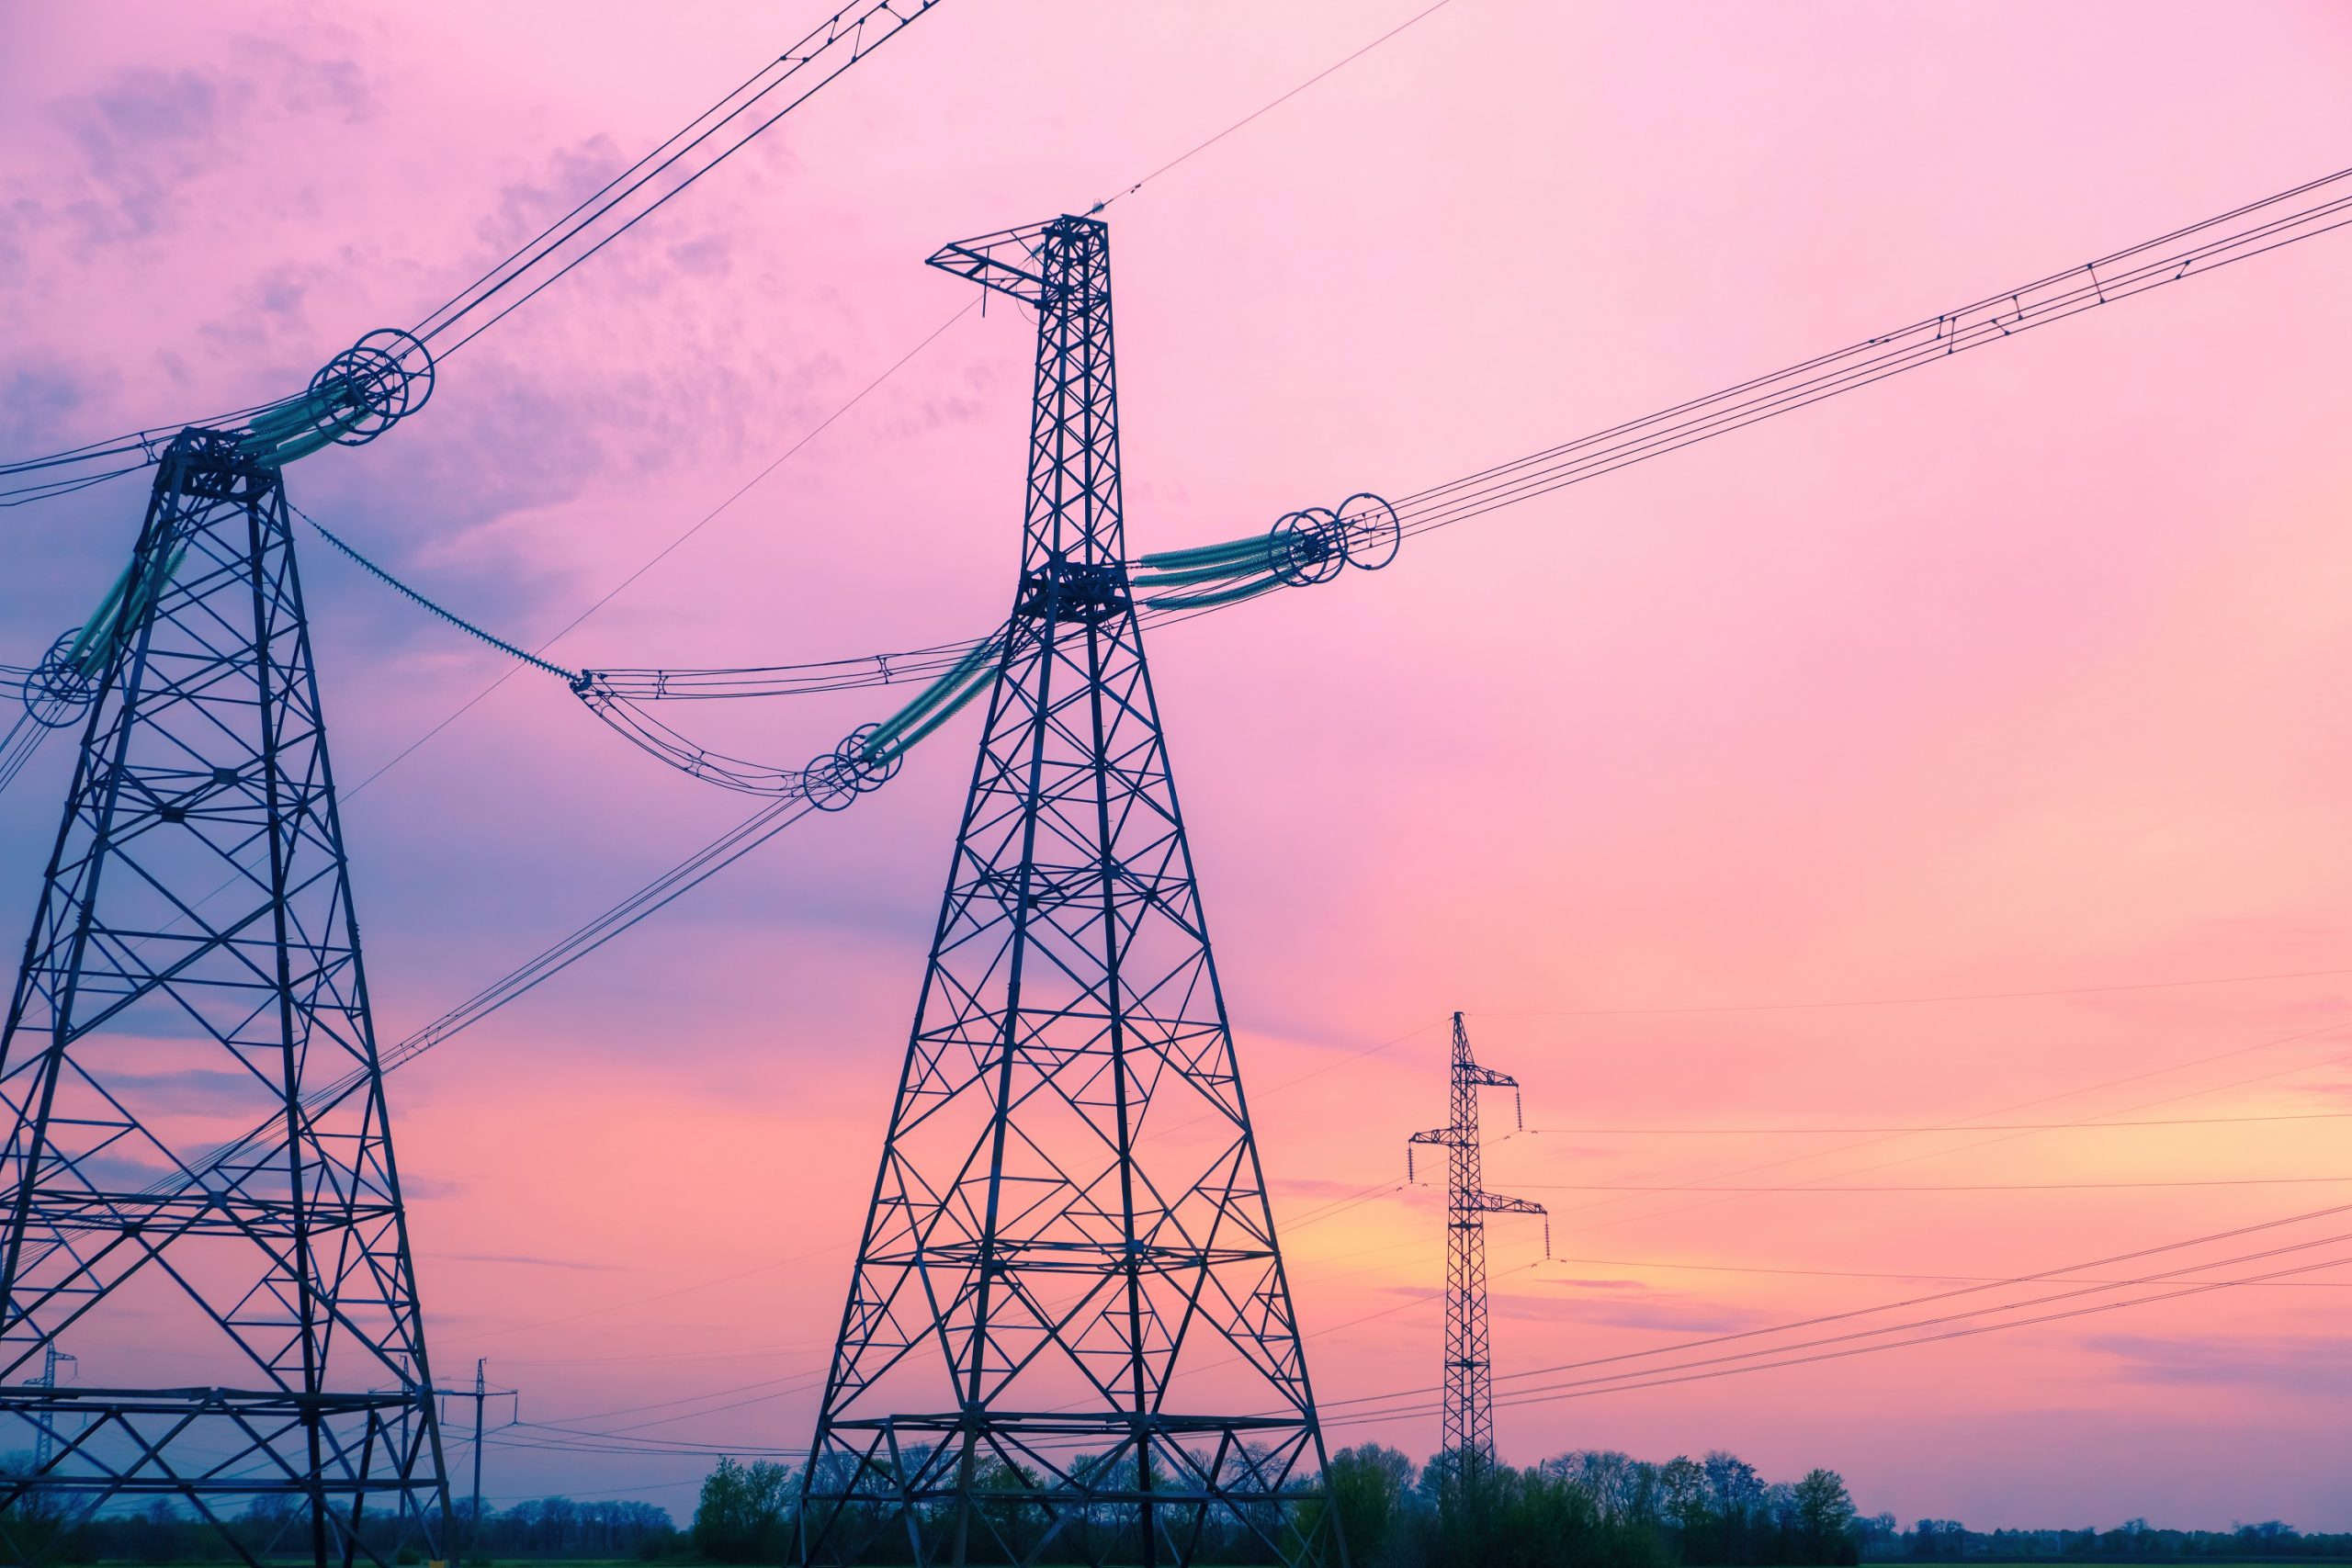 Telangana and Tamil Nadu have overcome the restriction imposed on them on the purchase of power from power exchanges (Creative Commons)